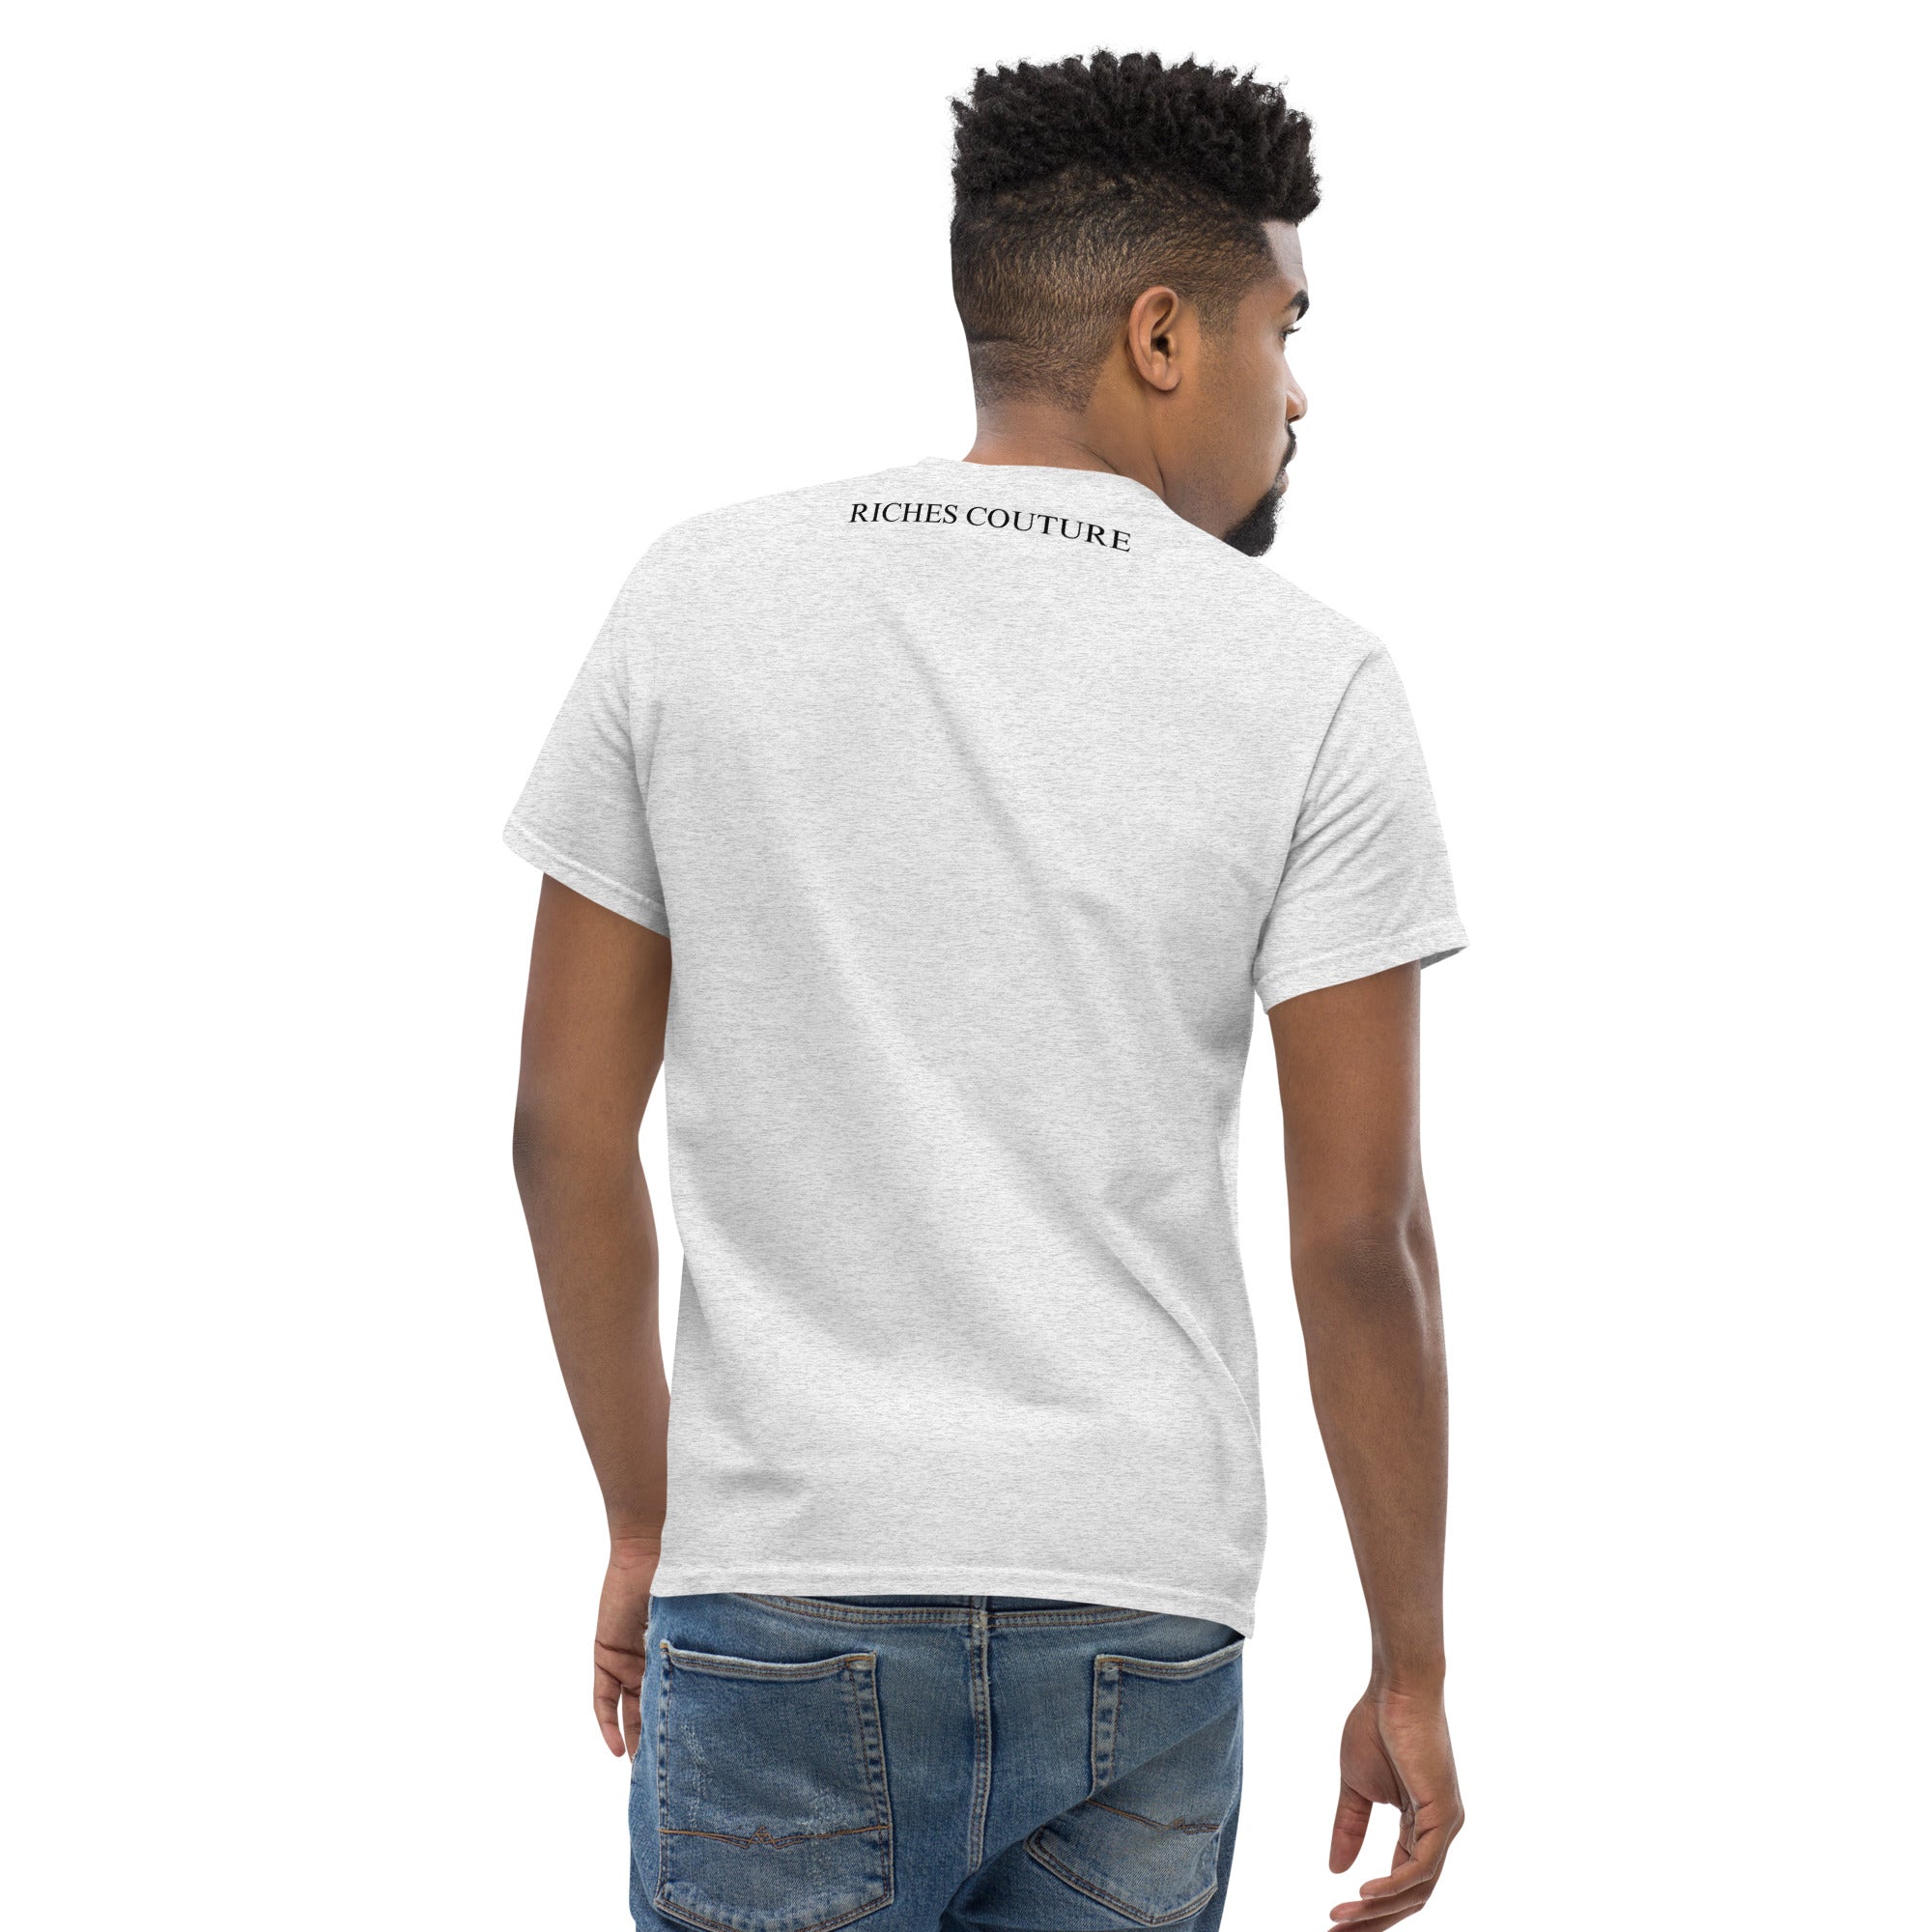 Riches Couture Men's Classic Cotton Tee